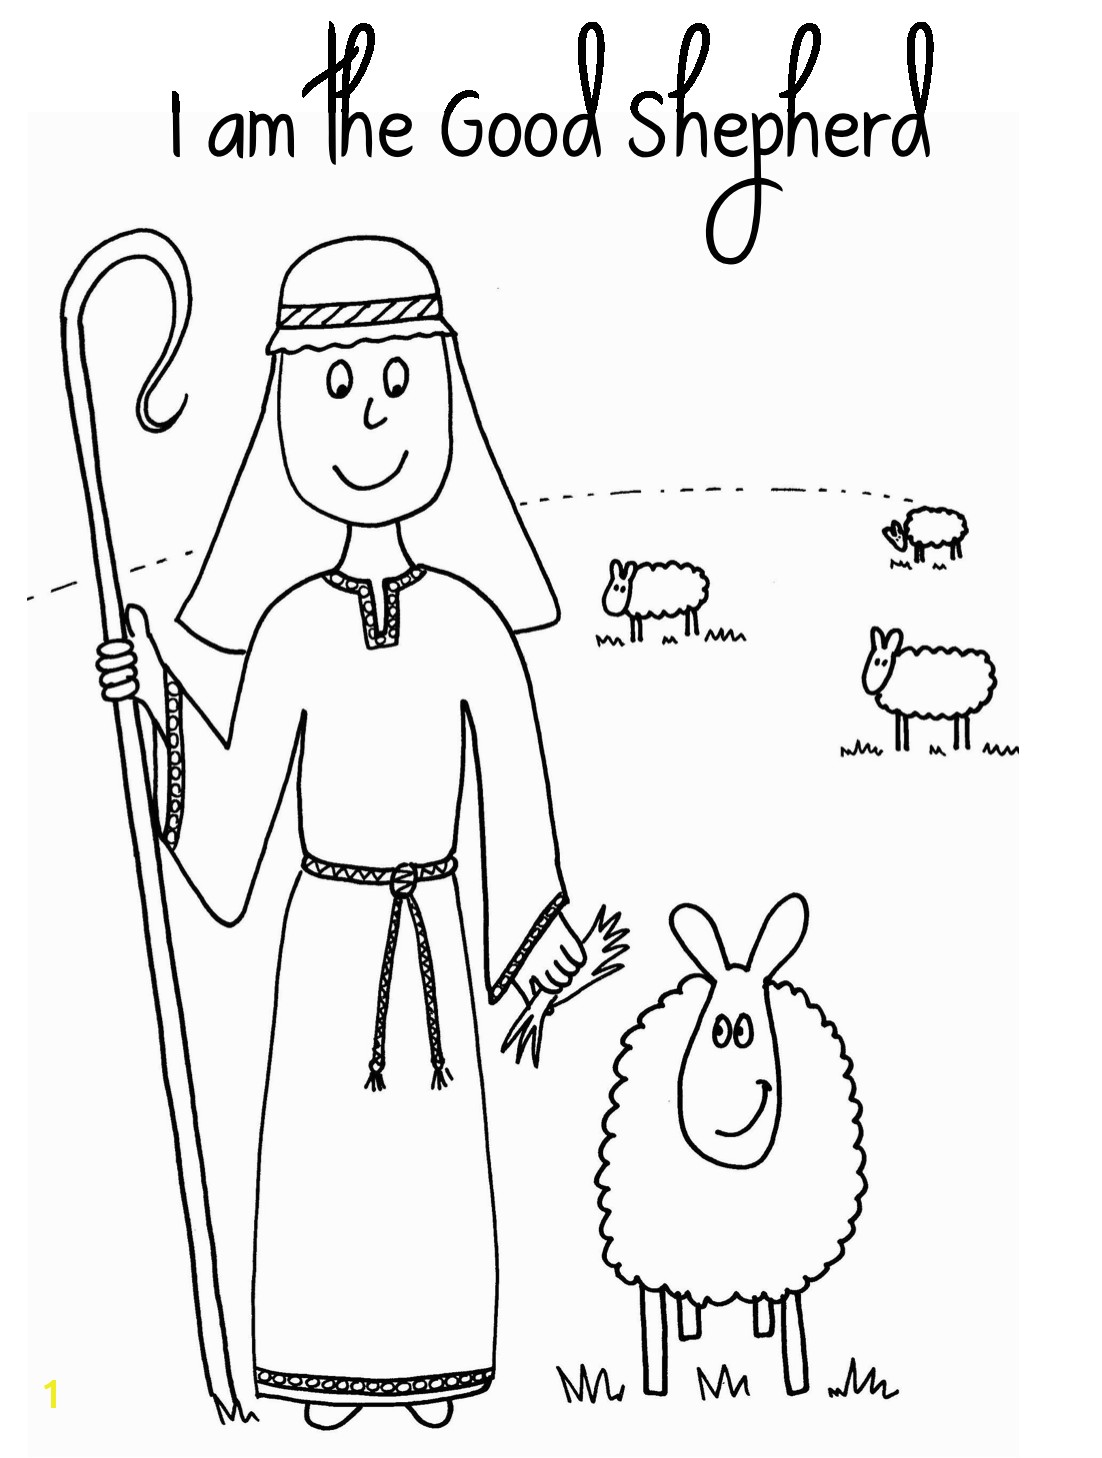 The Lost Sheep Coloring Page Jedi Craft Girl Day 7 the Lost Sheep